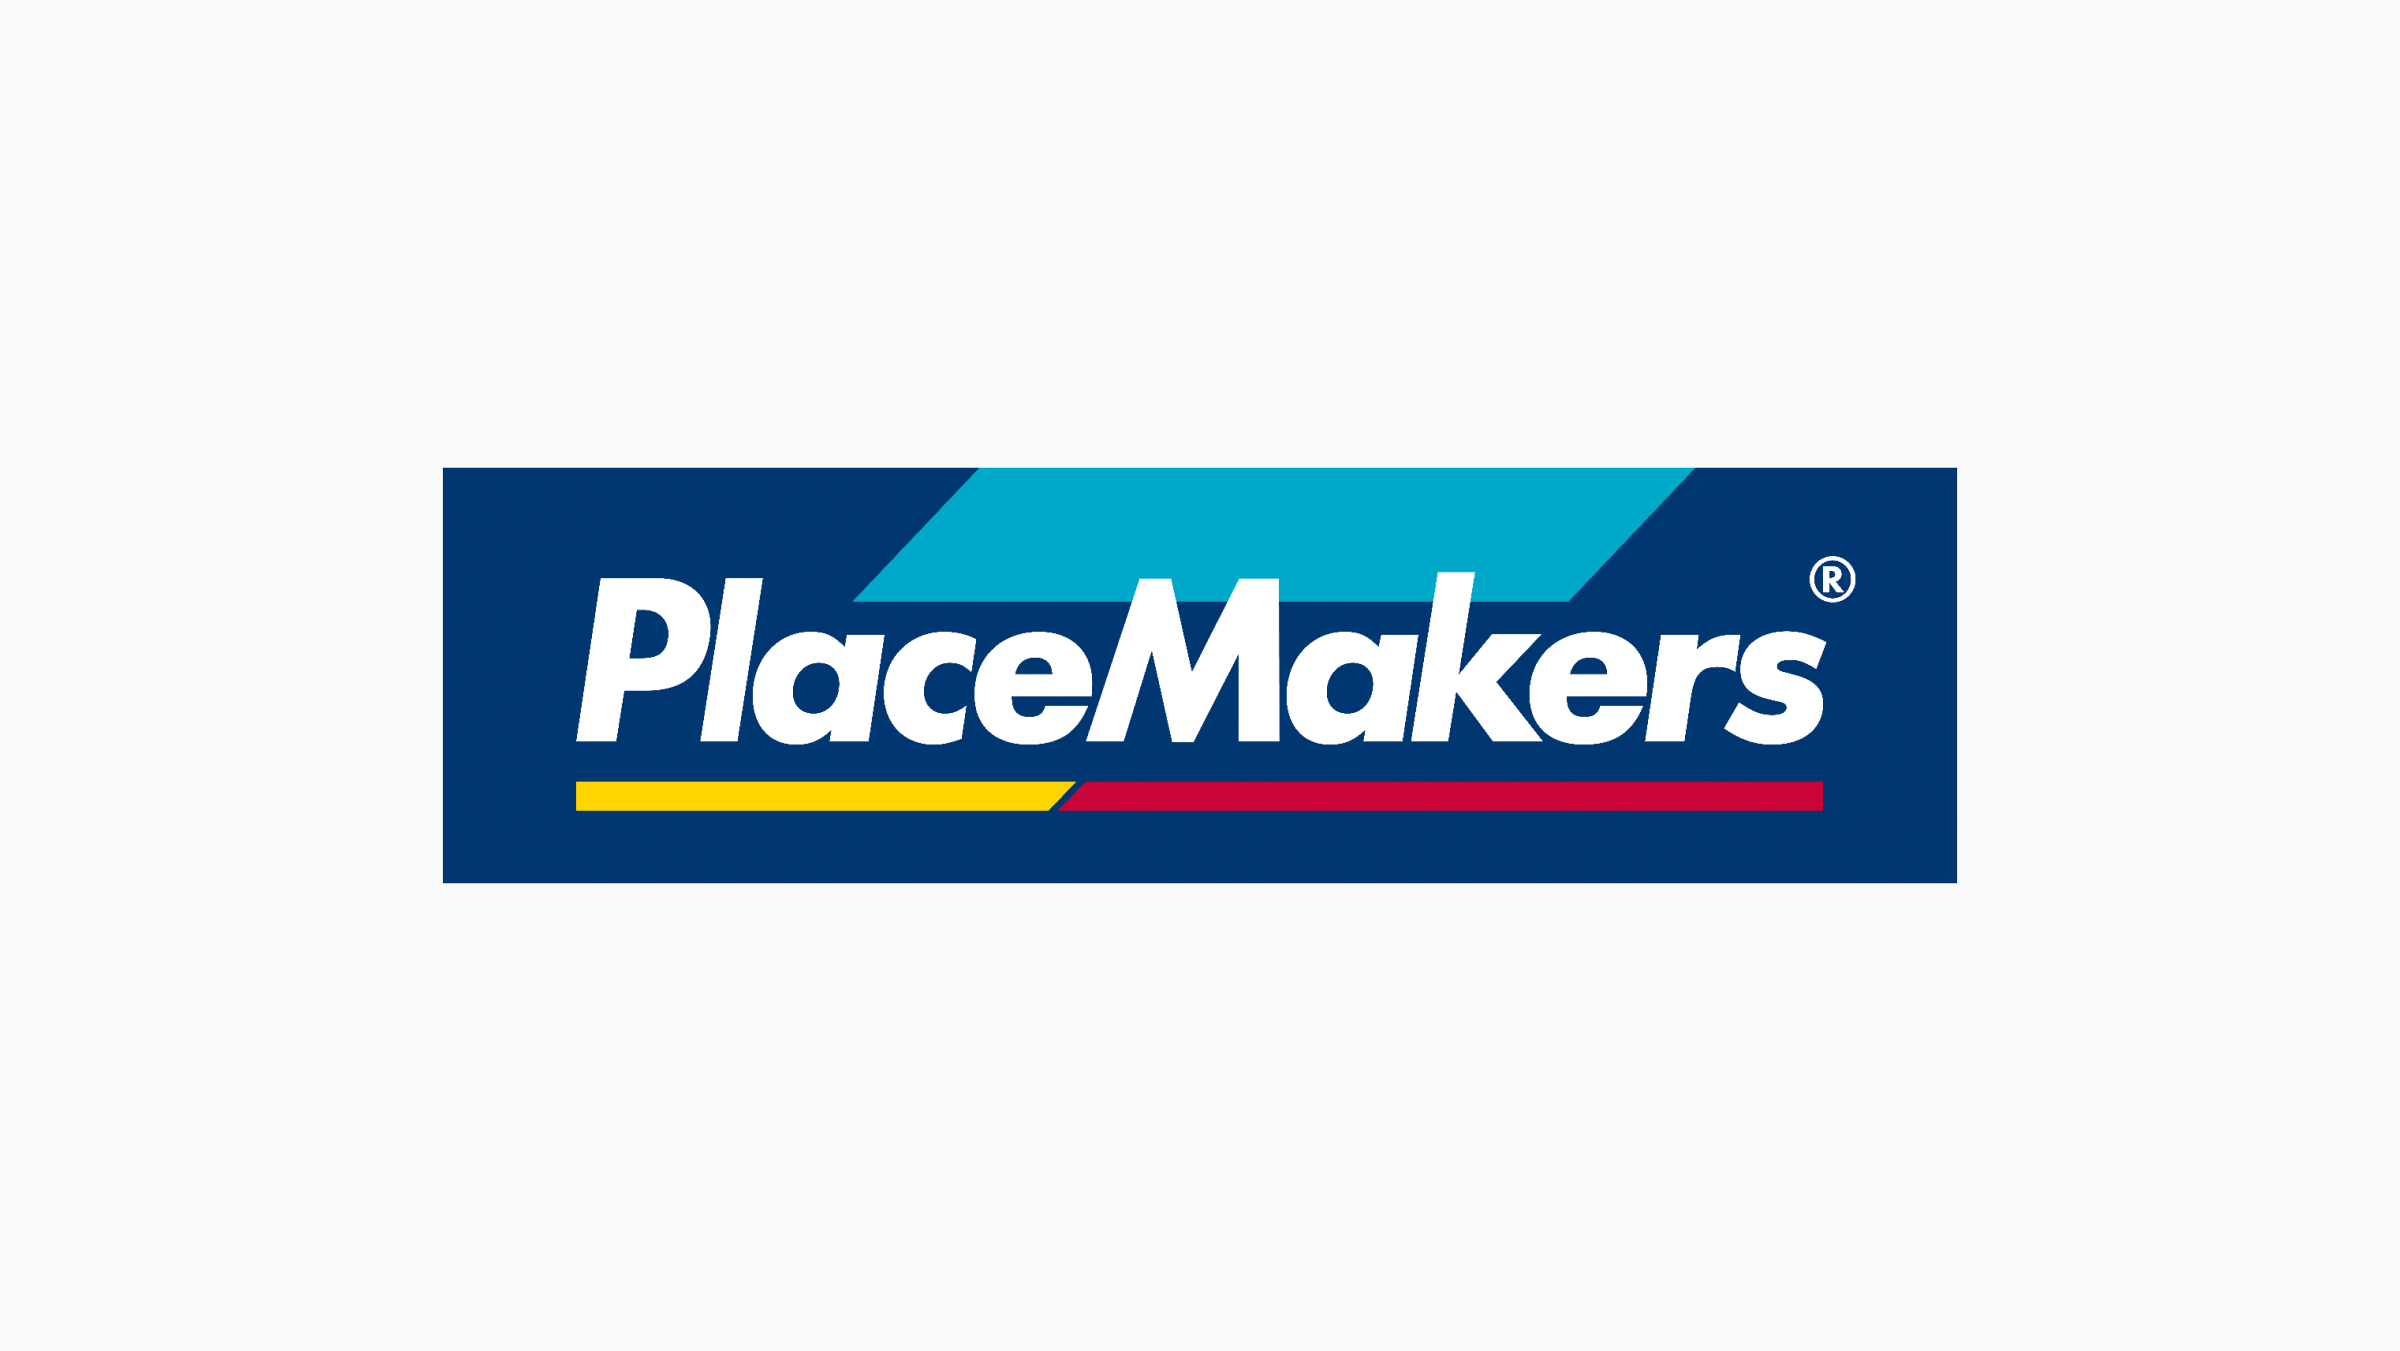 The PlaceMakers logo